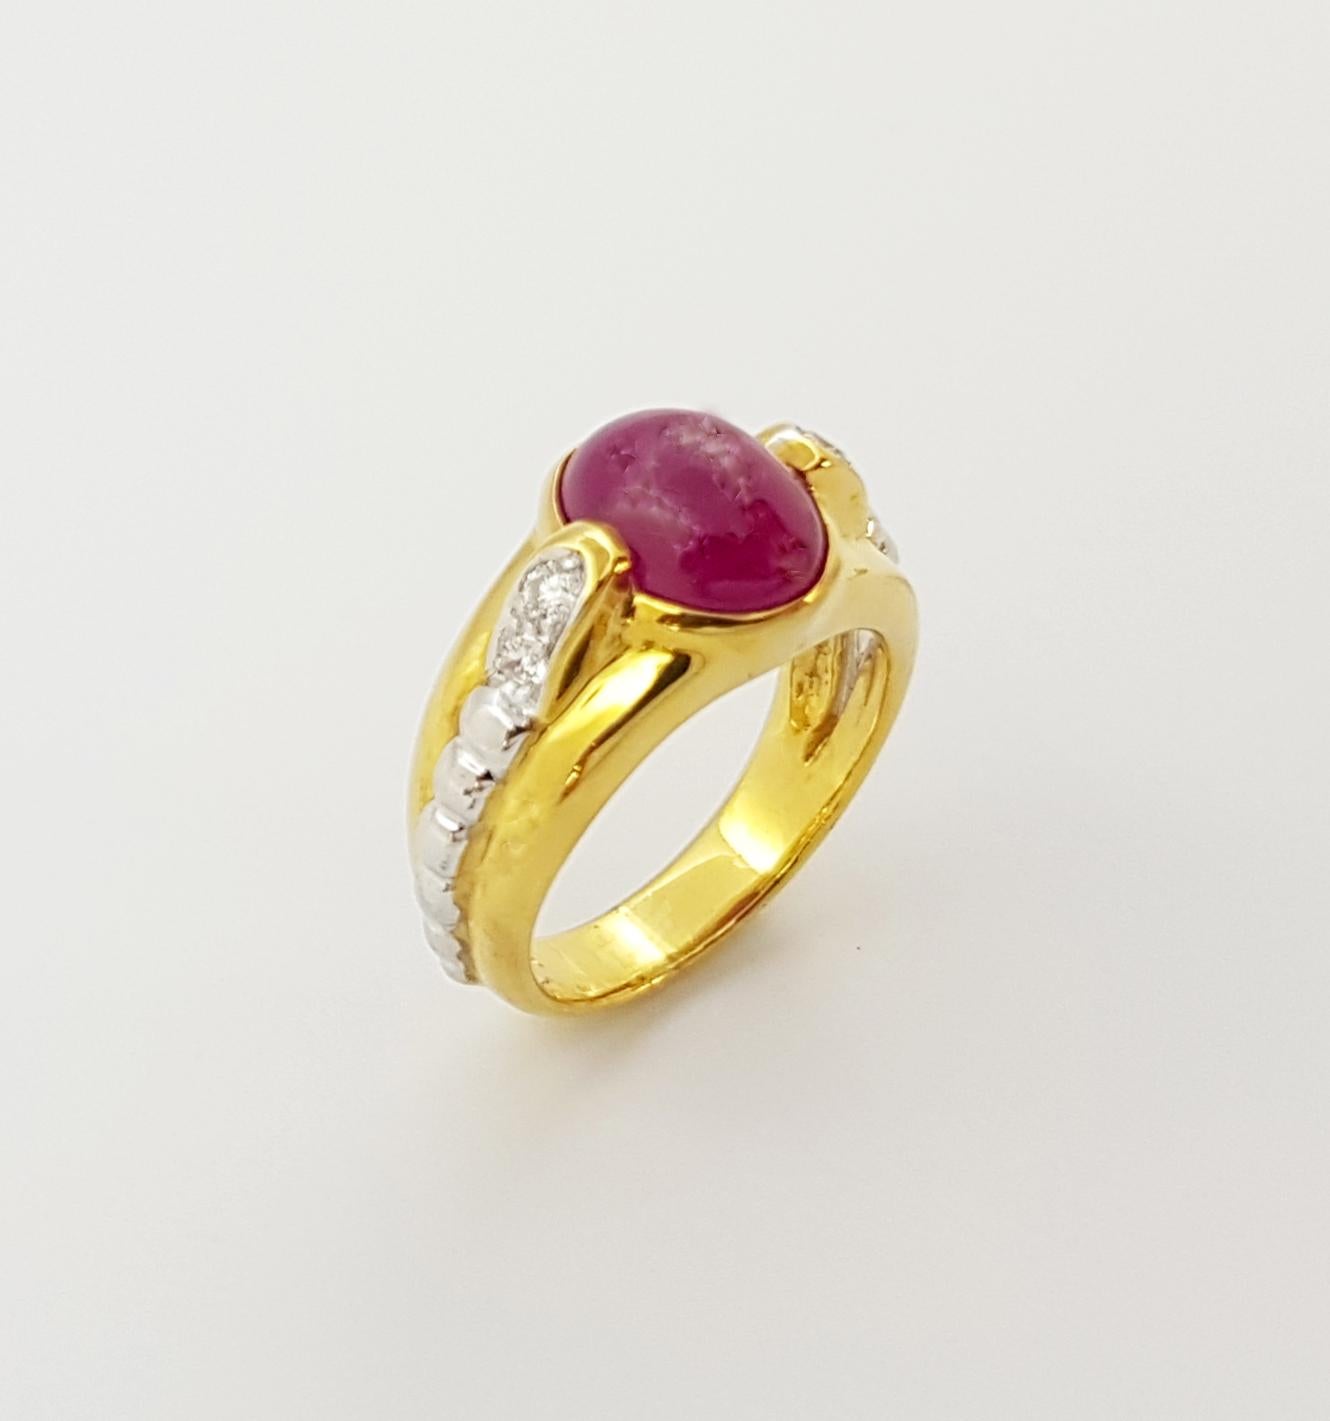 Cabochon Ruby with Diamond Ring Set in 18 Karat Gold Settings For Sale 3